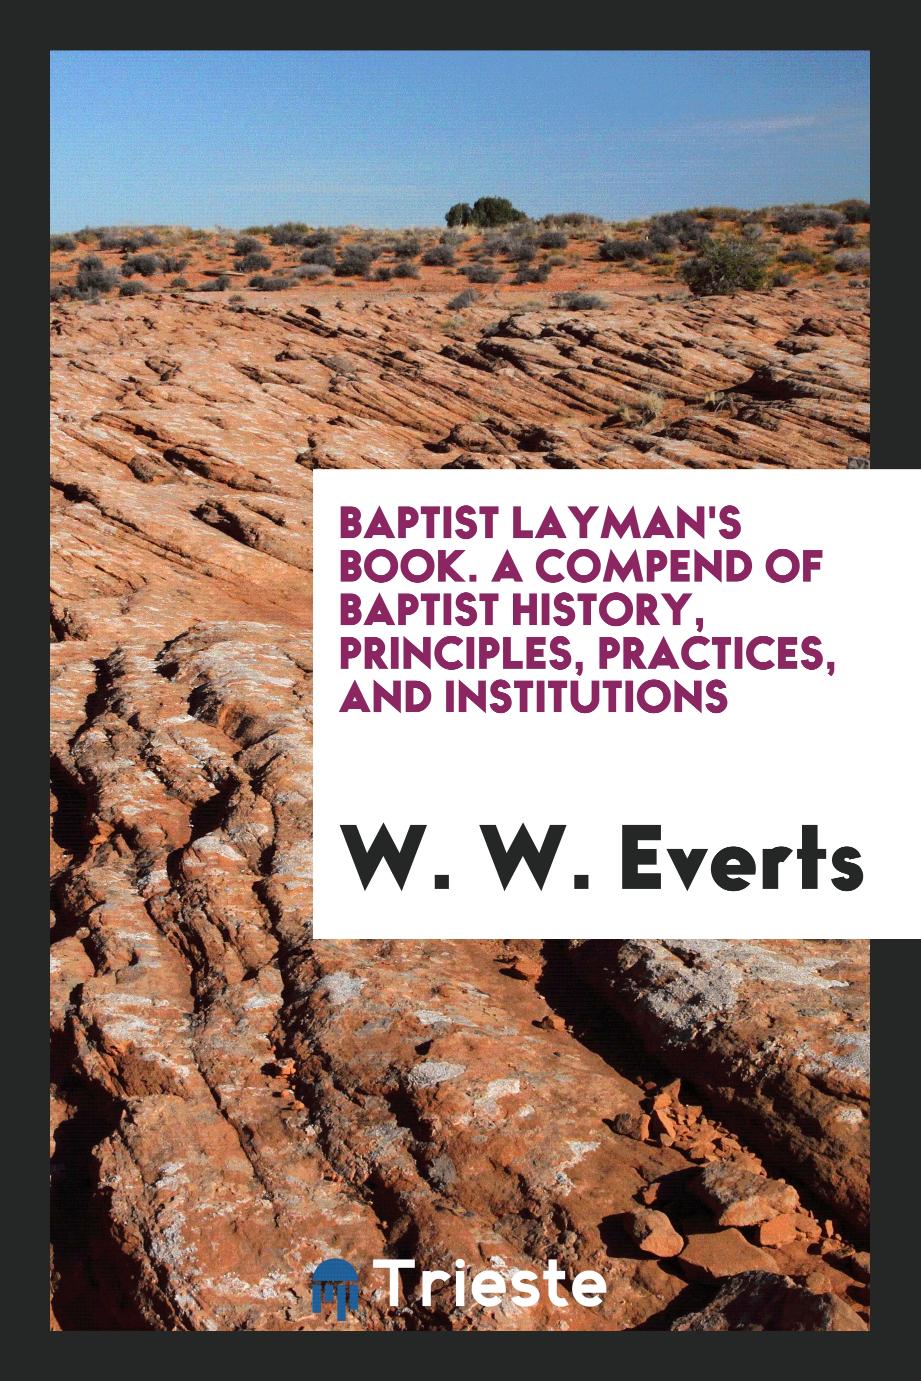 Baptist Layman's Book. A Compend of Baptist History, Principles, Practices, and Institutions